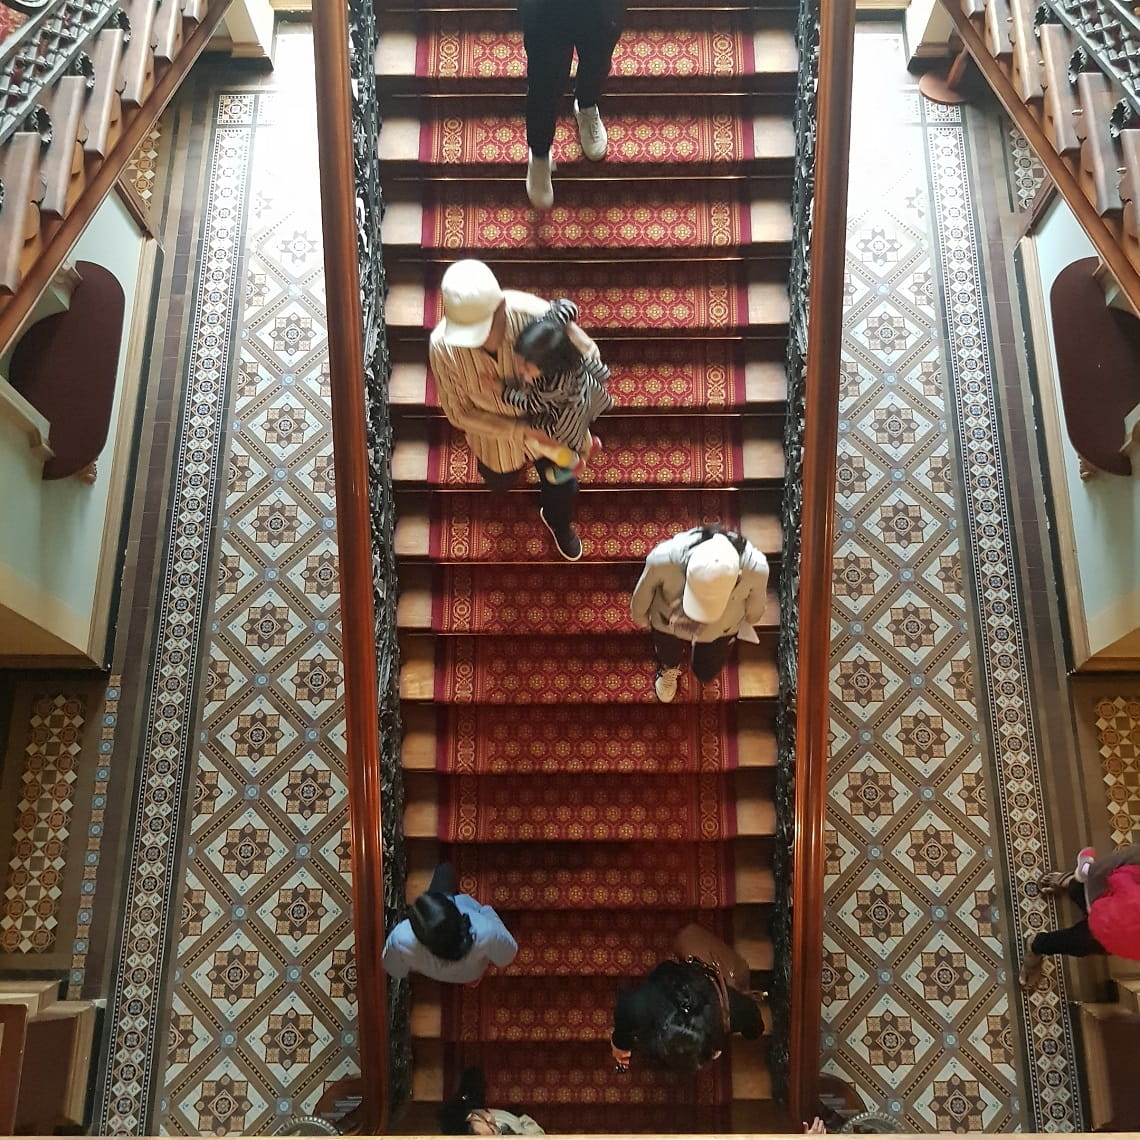 Aerial view of people walking down an old and grand staircase